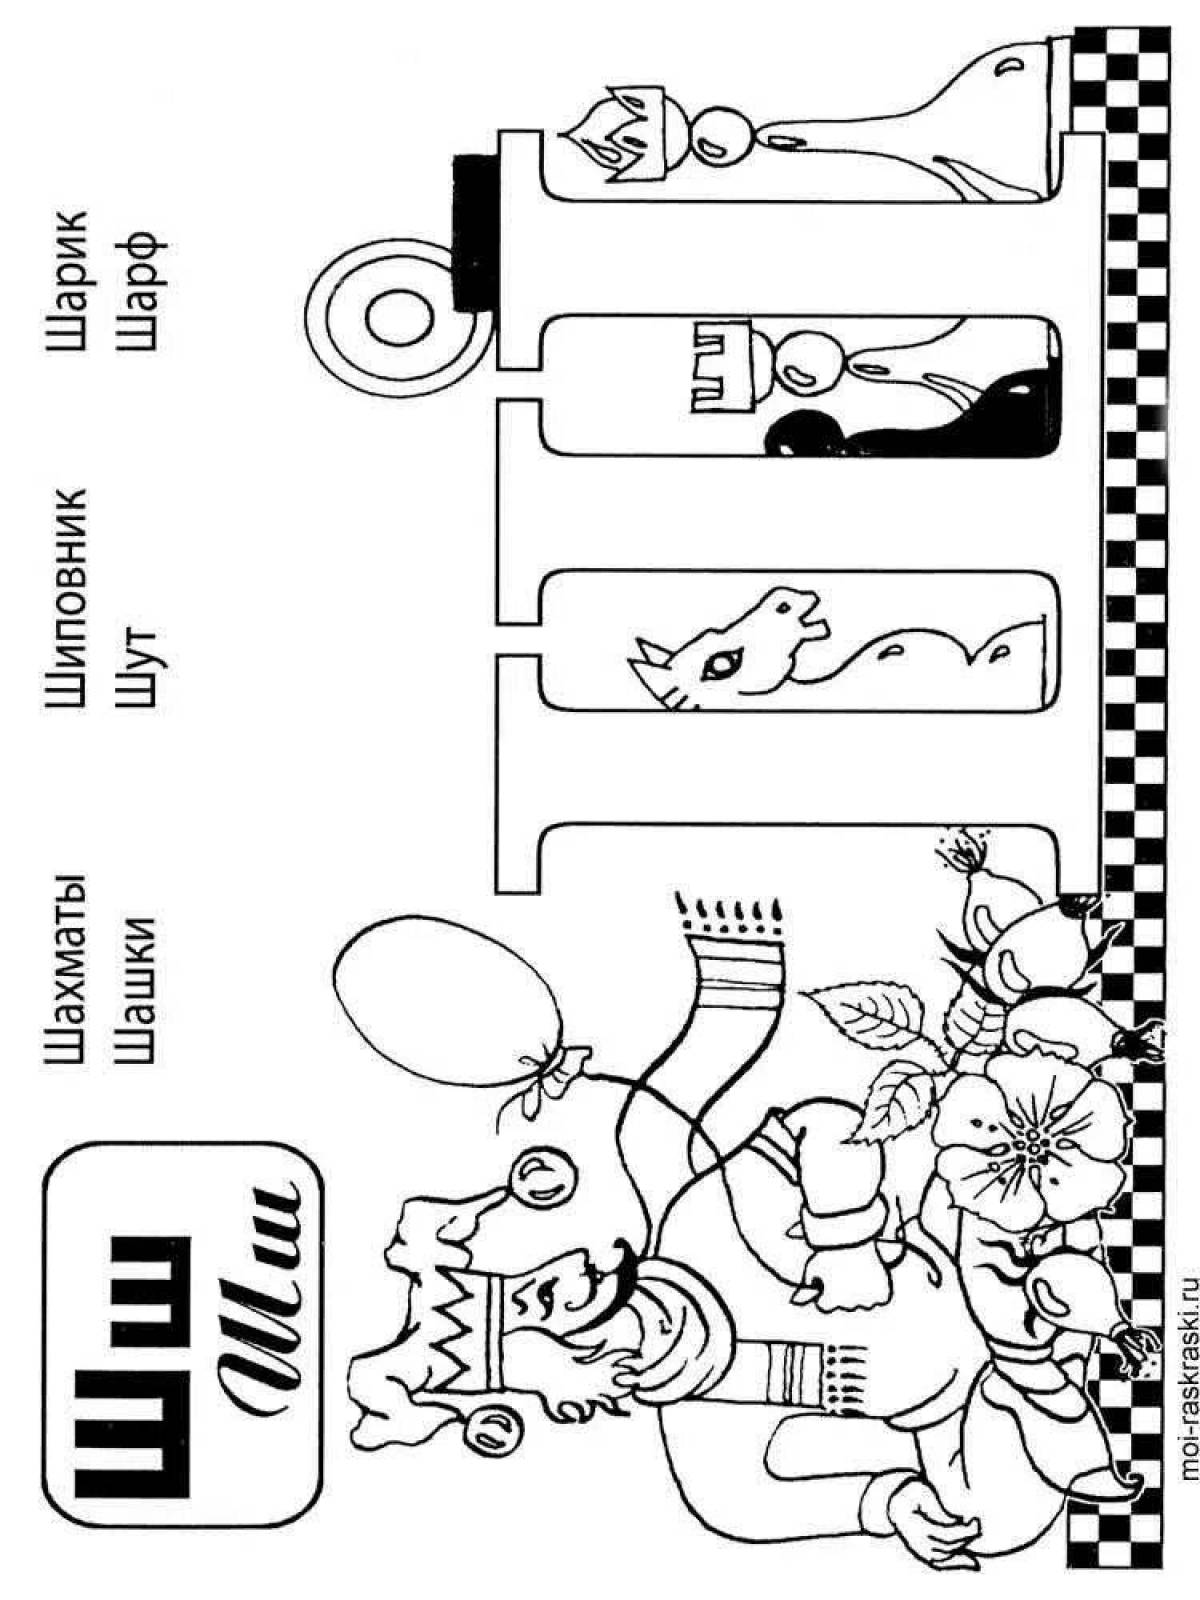 Bright coloring page w